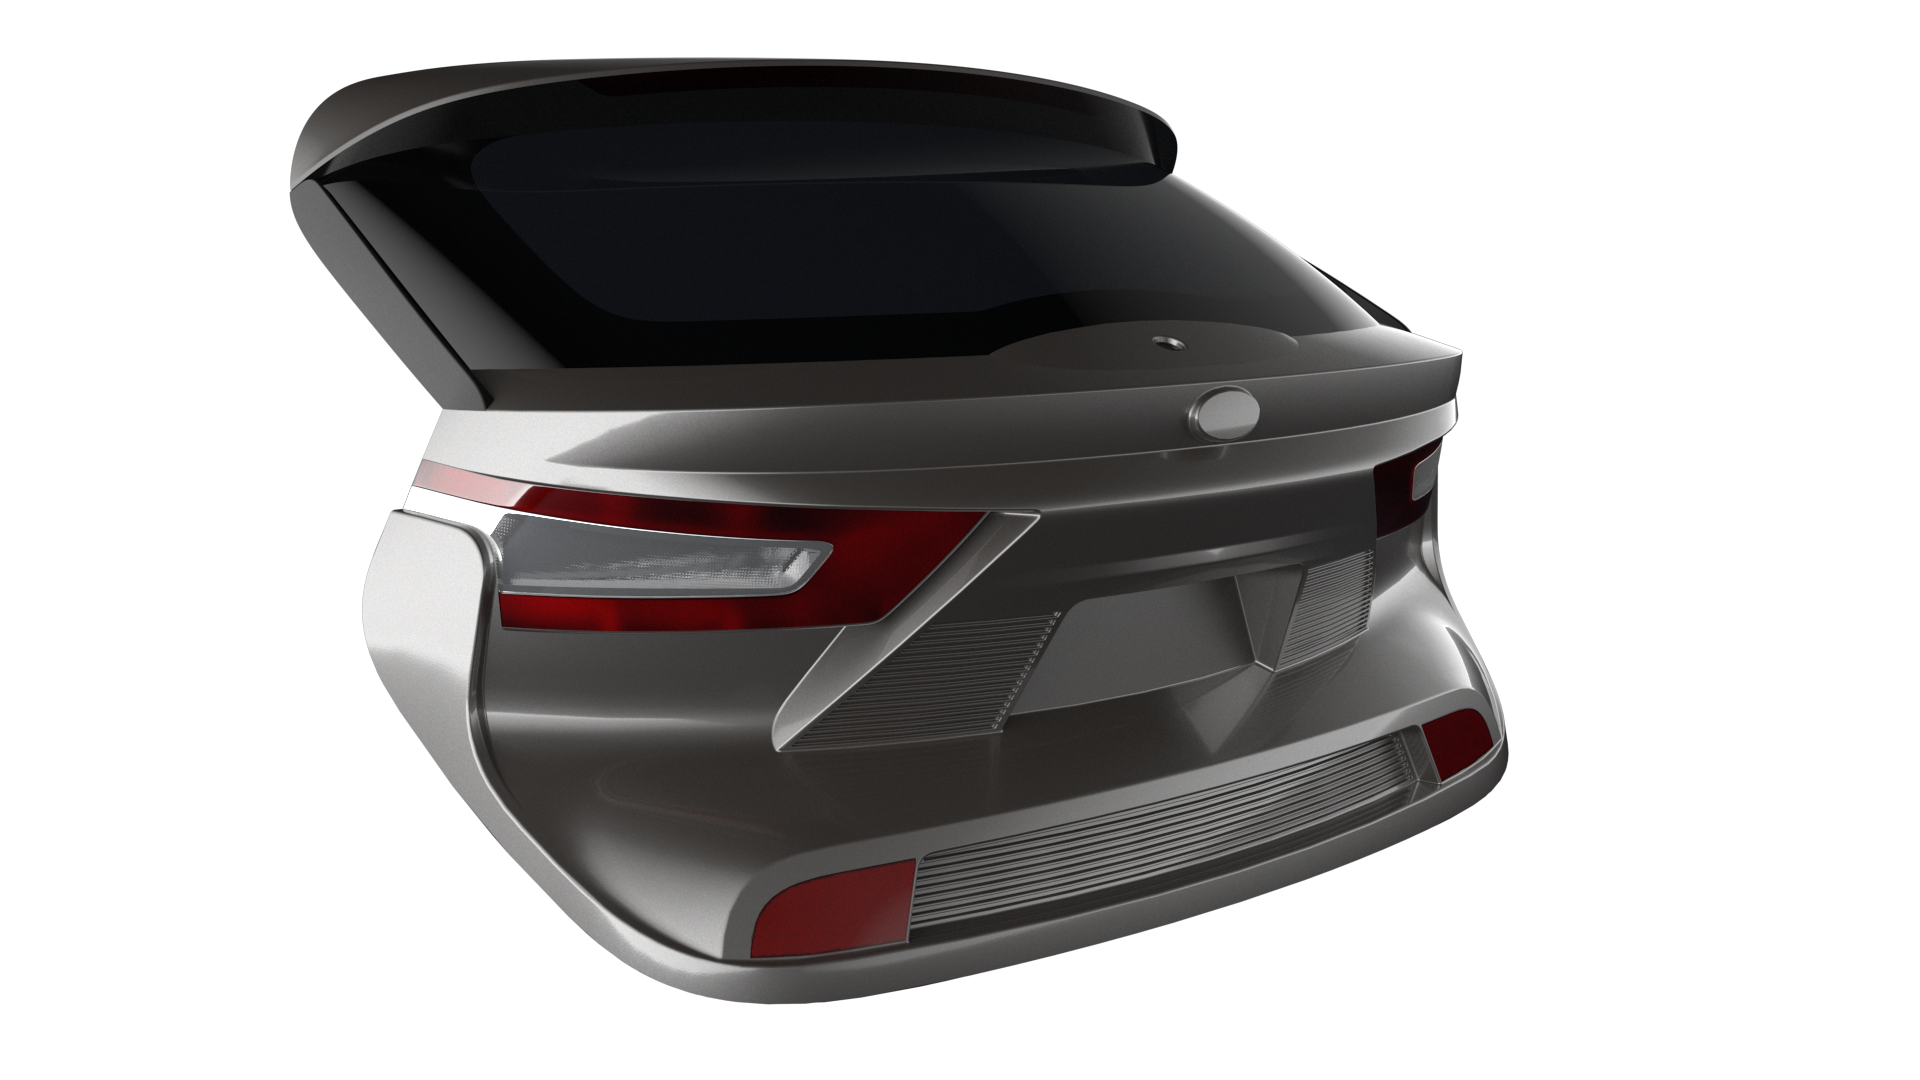 Magna thermoplastic liftgate